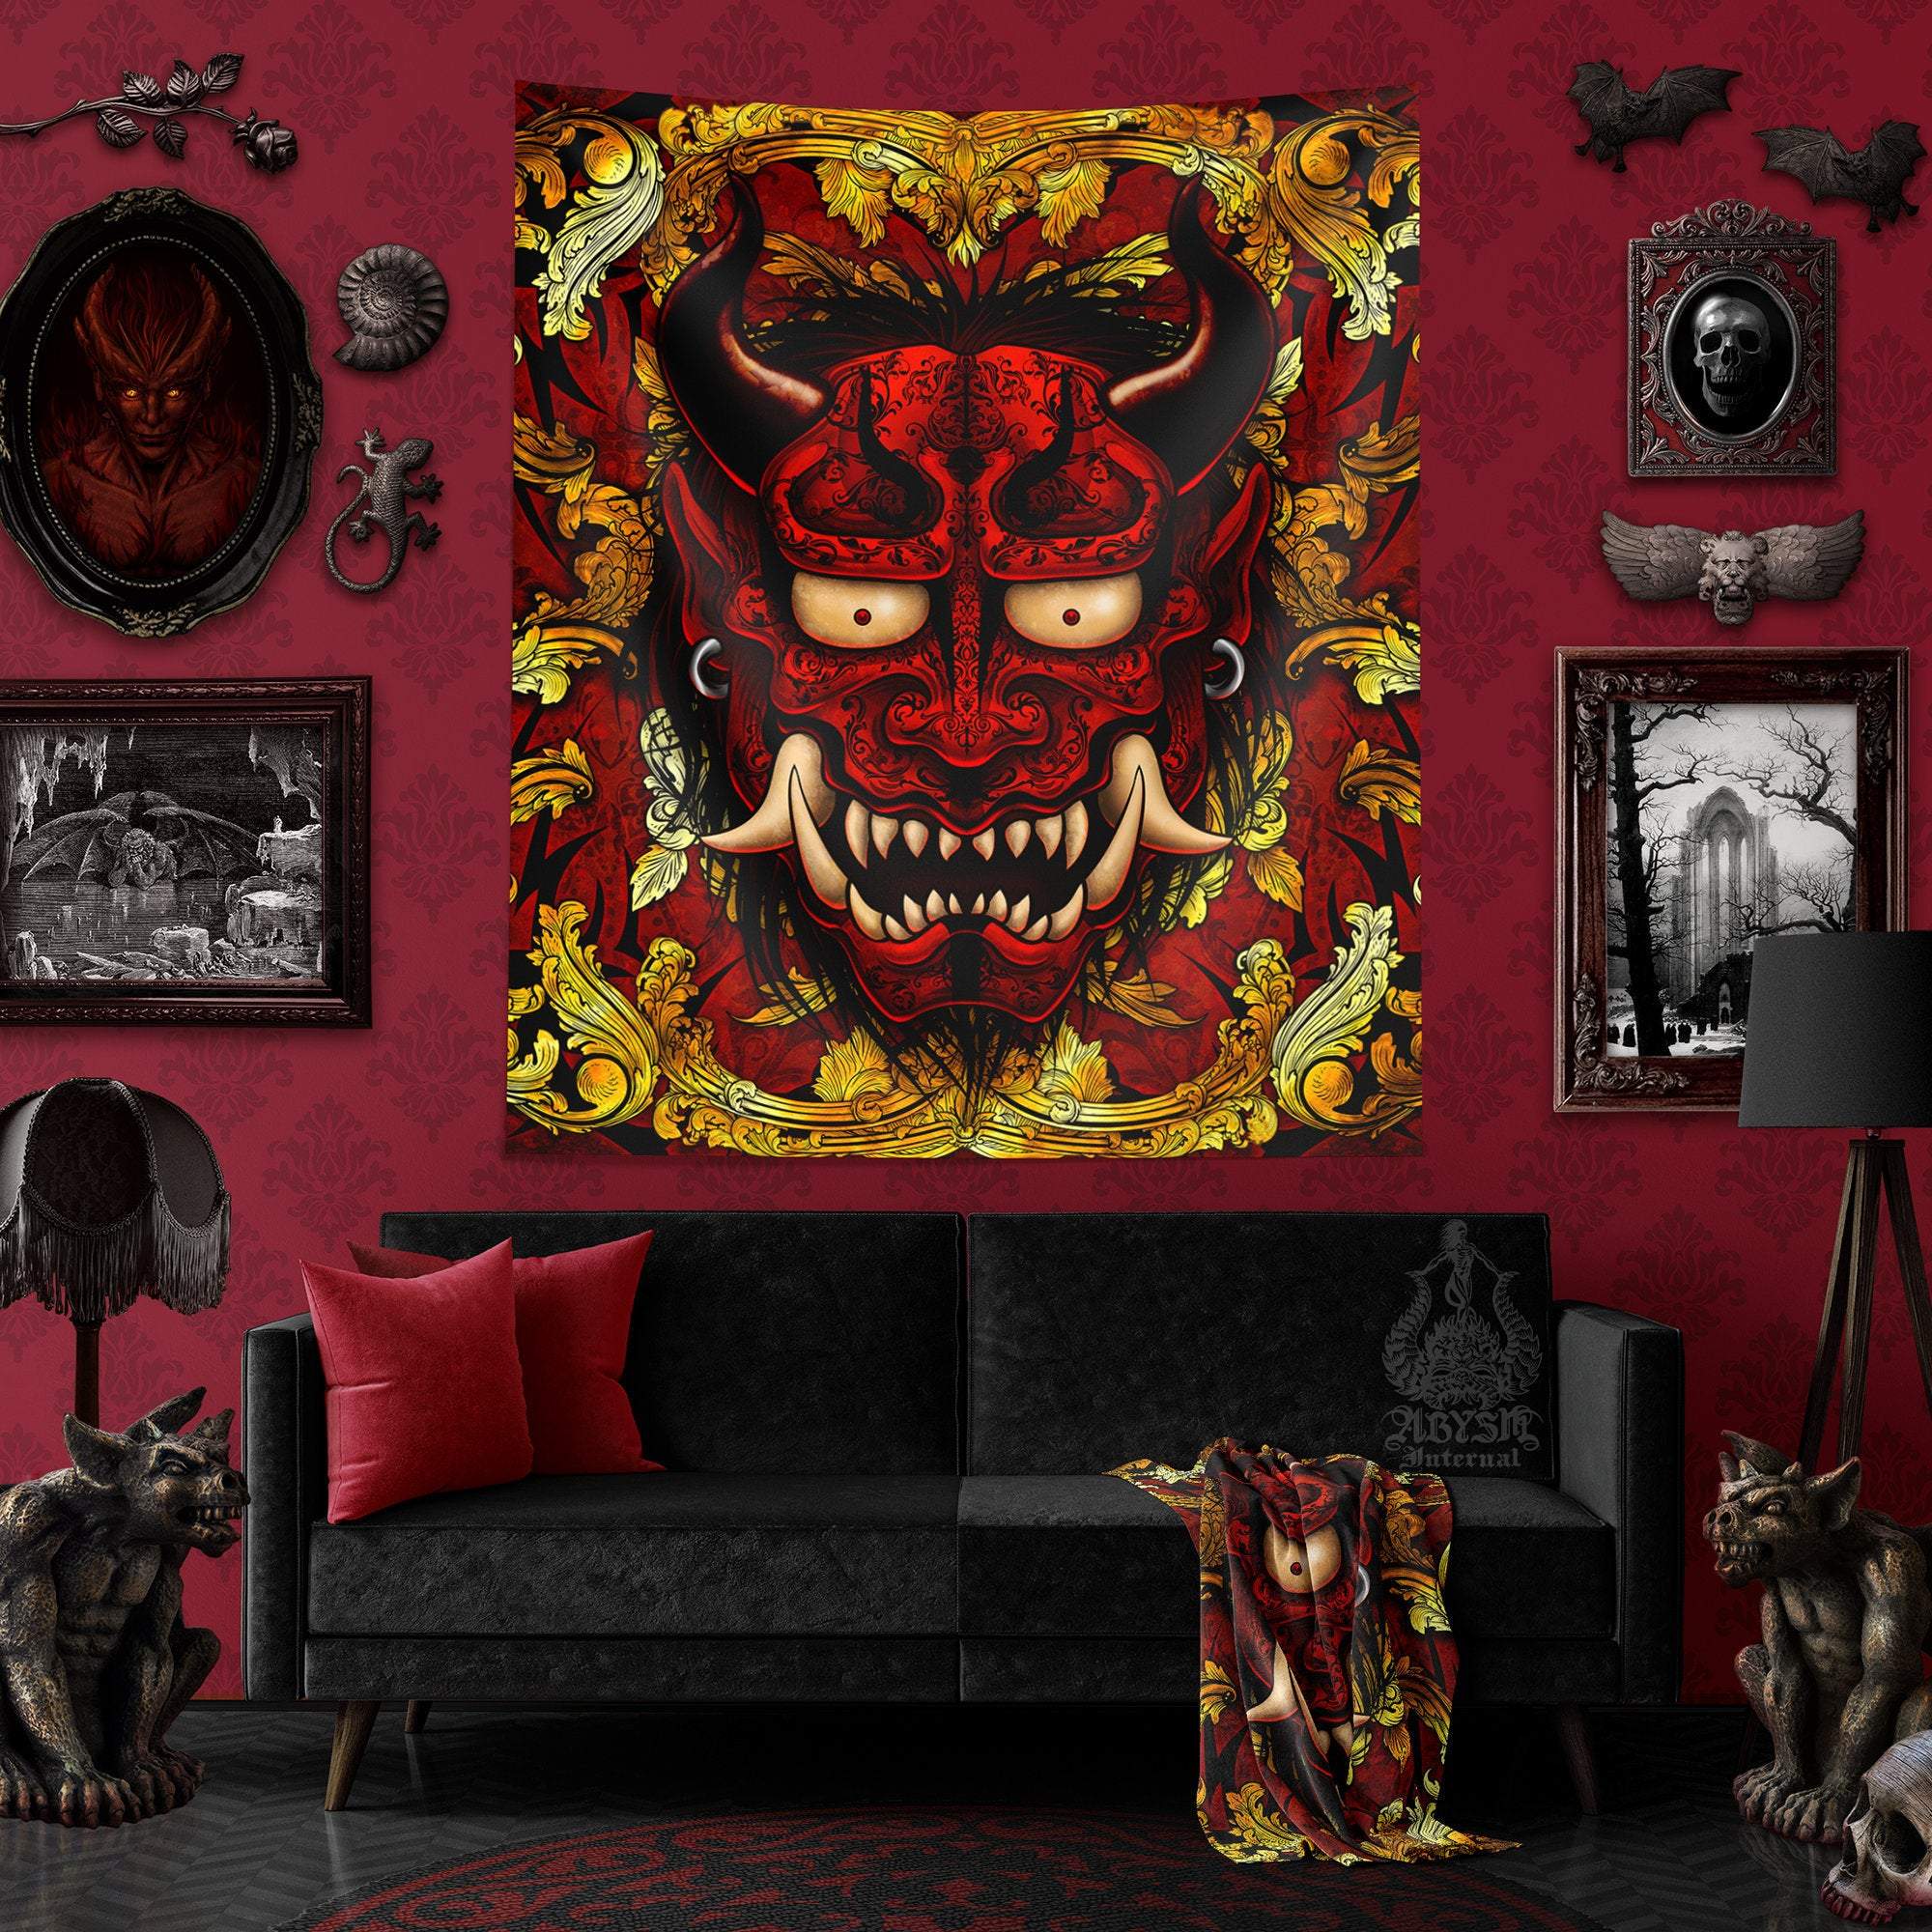 Oni Tapestry, Goth Wall Hanging, Japanese Demon, Anime and Gamer Home Decor, Art Print - Gold & Red - Abysm Internal